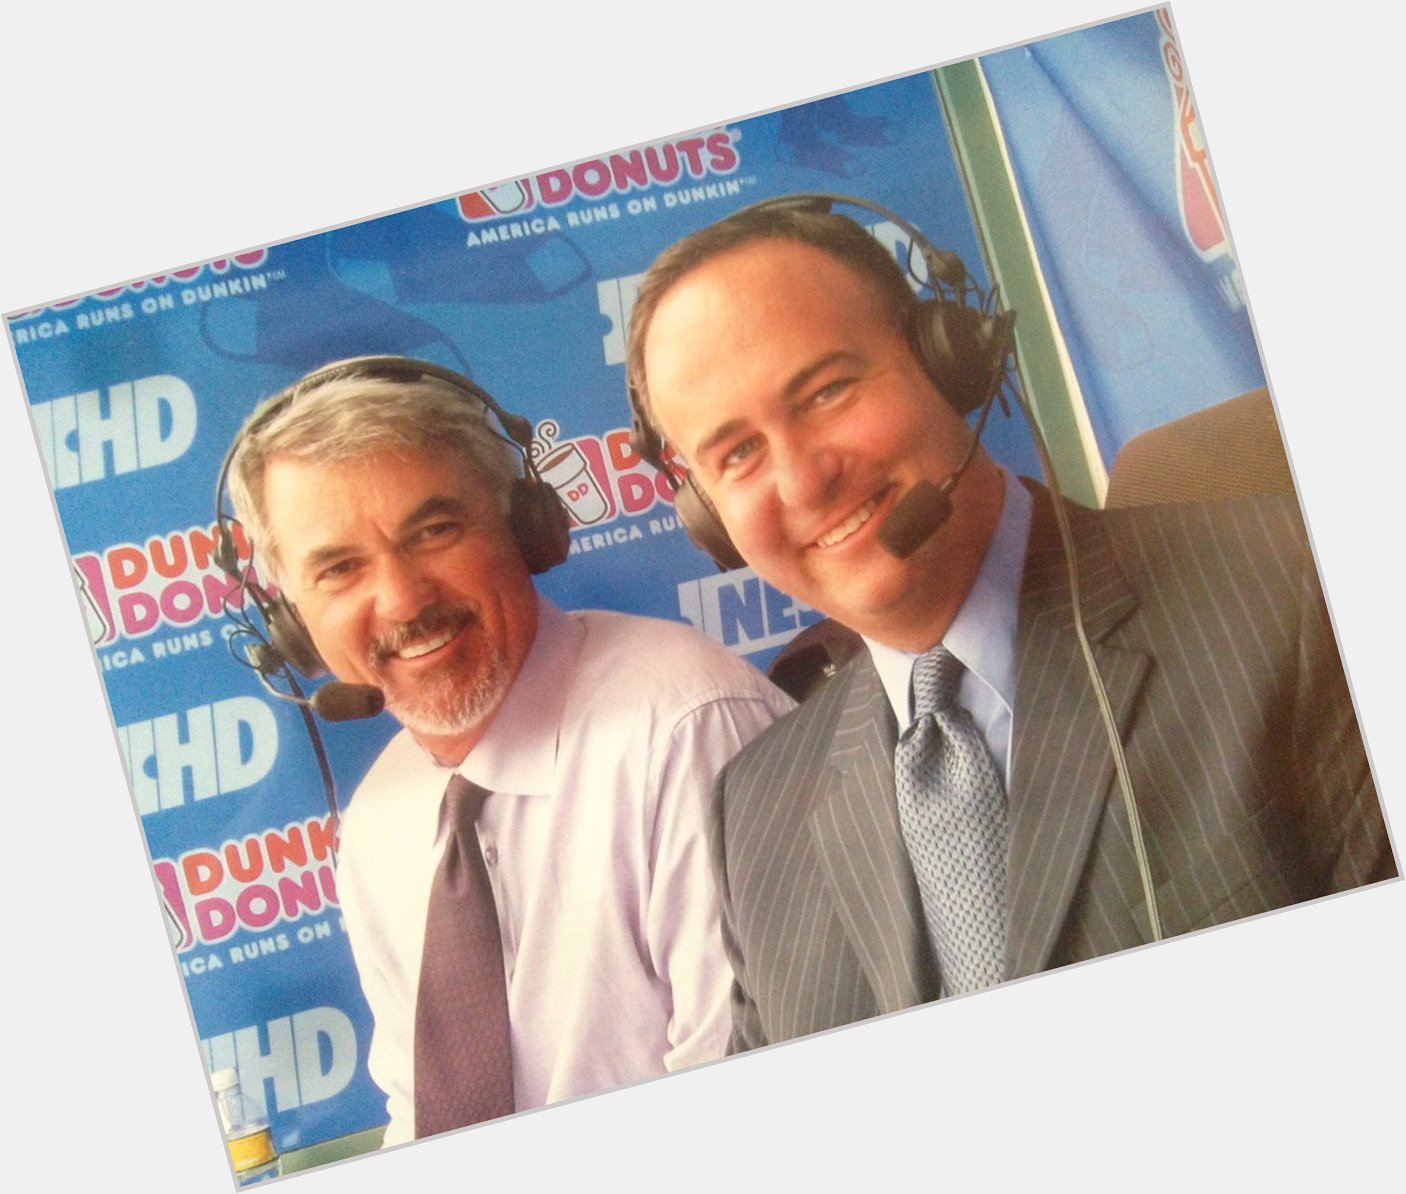 Happy Birthday to my boyhood Idol Dwight Evans. Honored to have had the chance to work with him. 